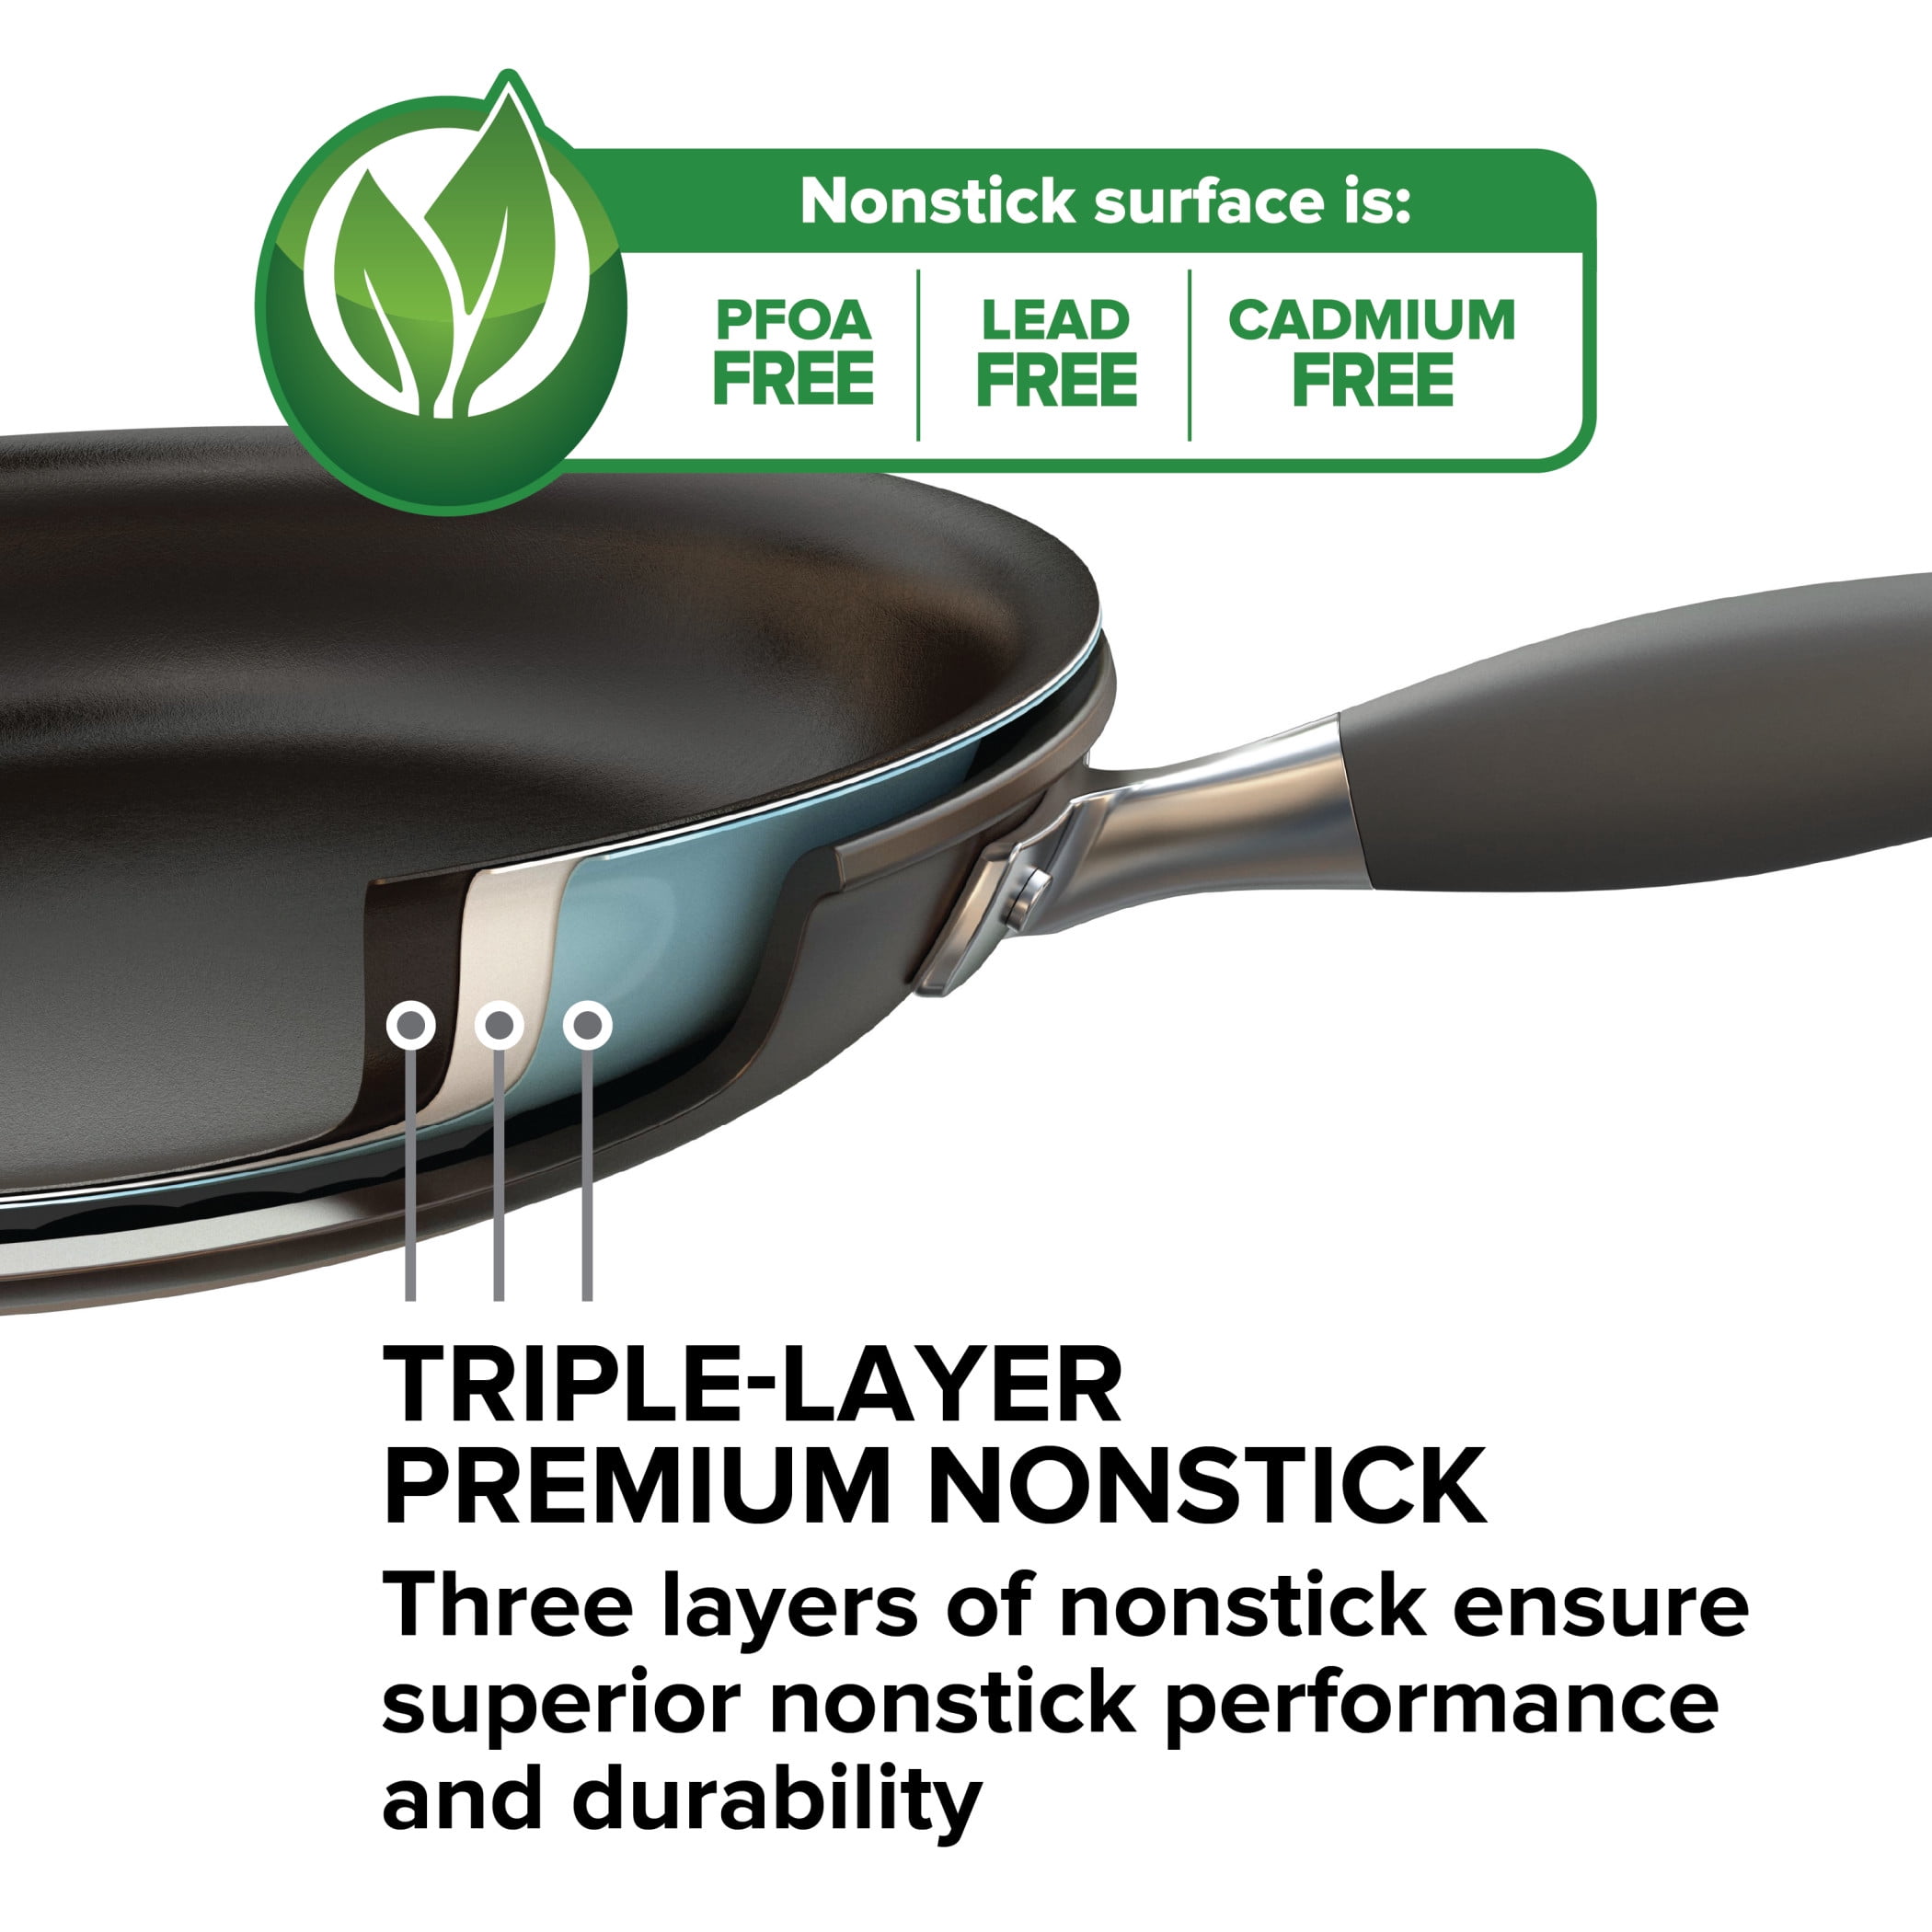 Anolon Authority hard-anodized Nonstick Skillet 10.25-Inch N-5923 C 